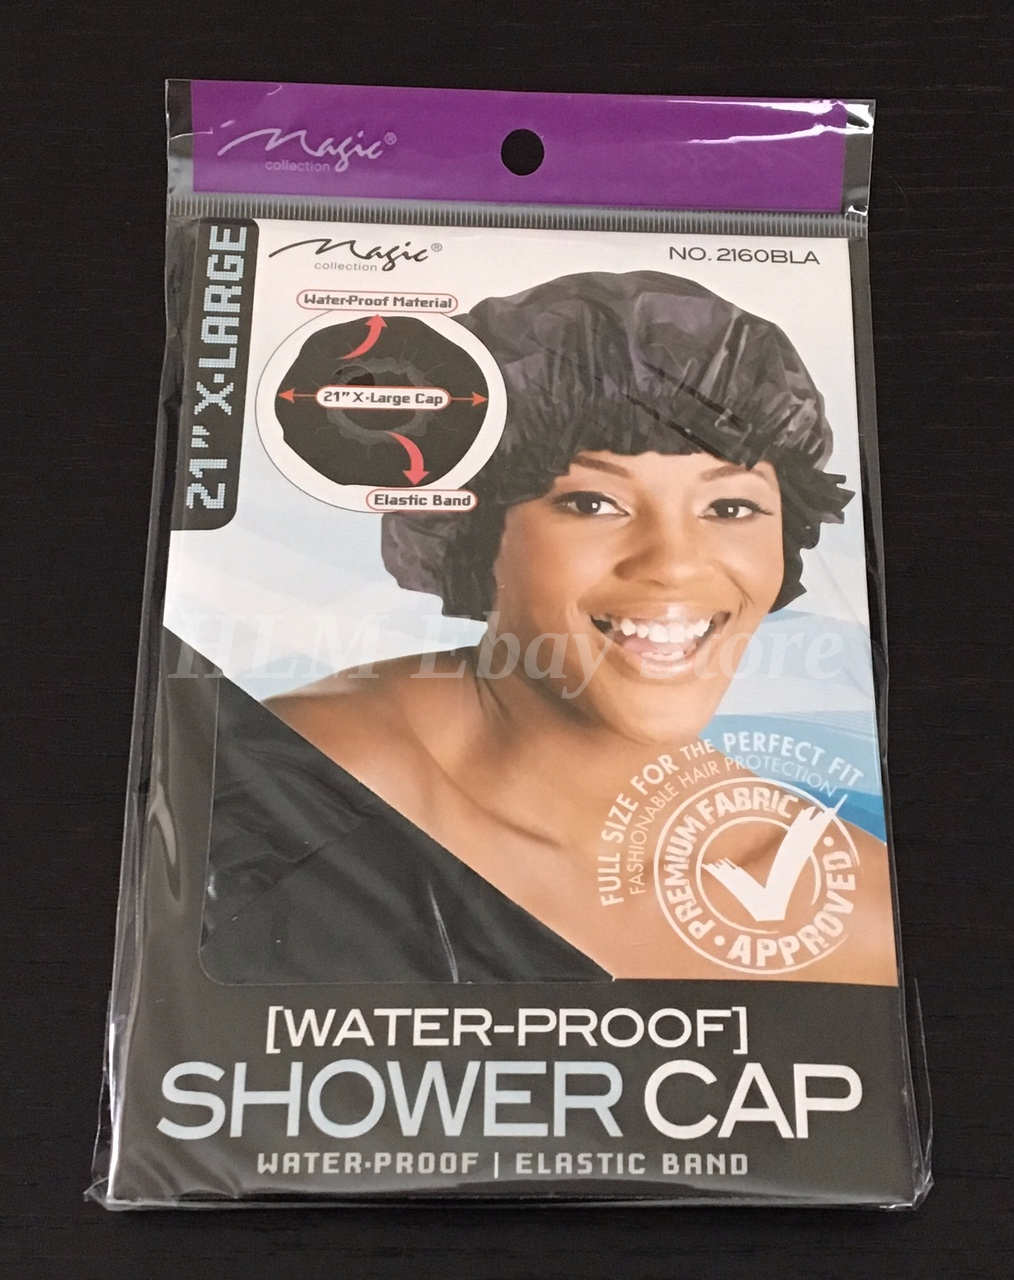 Black 21" Xlarge Waterproof Shower Cap Premium Elastic With Band For Perfect Fit